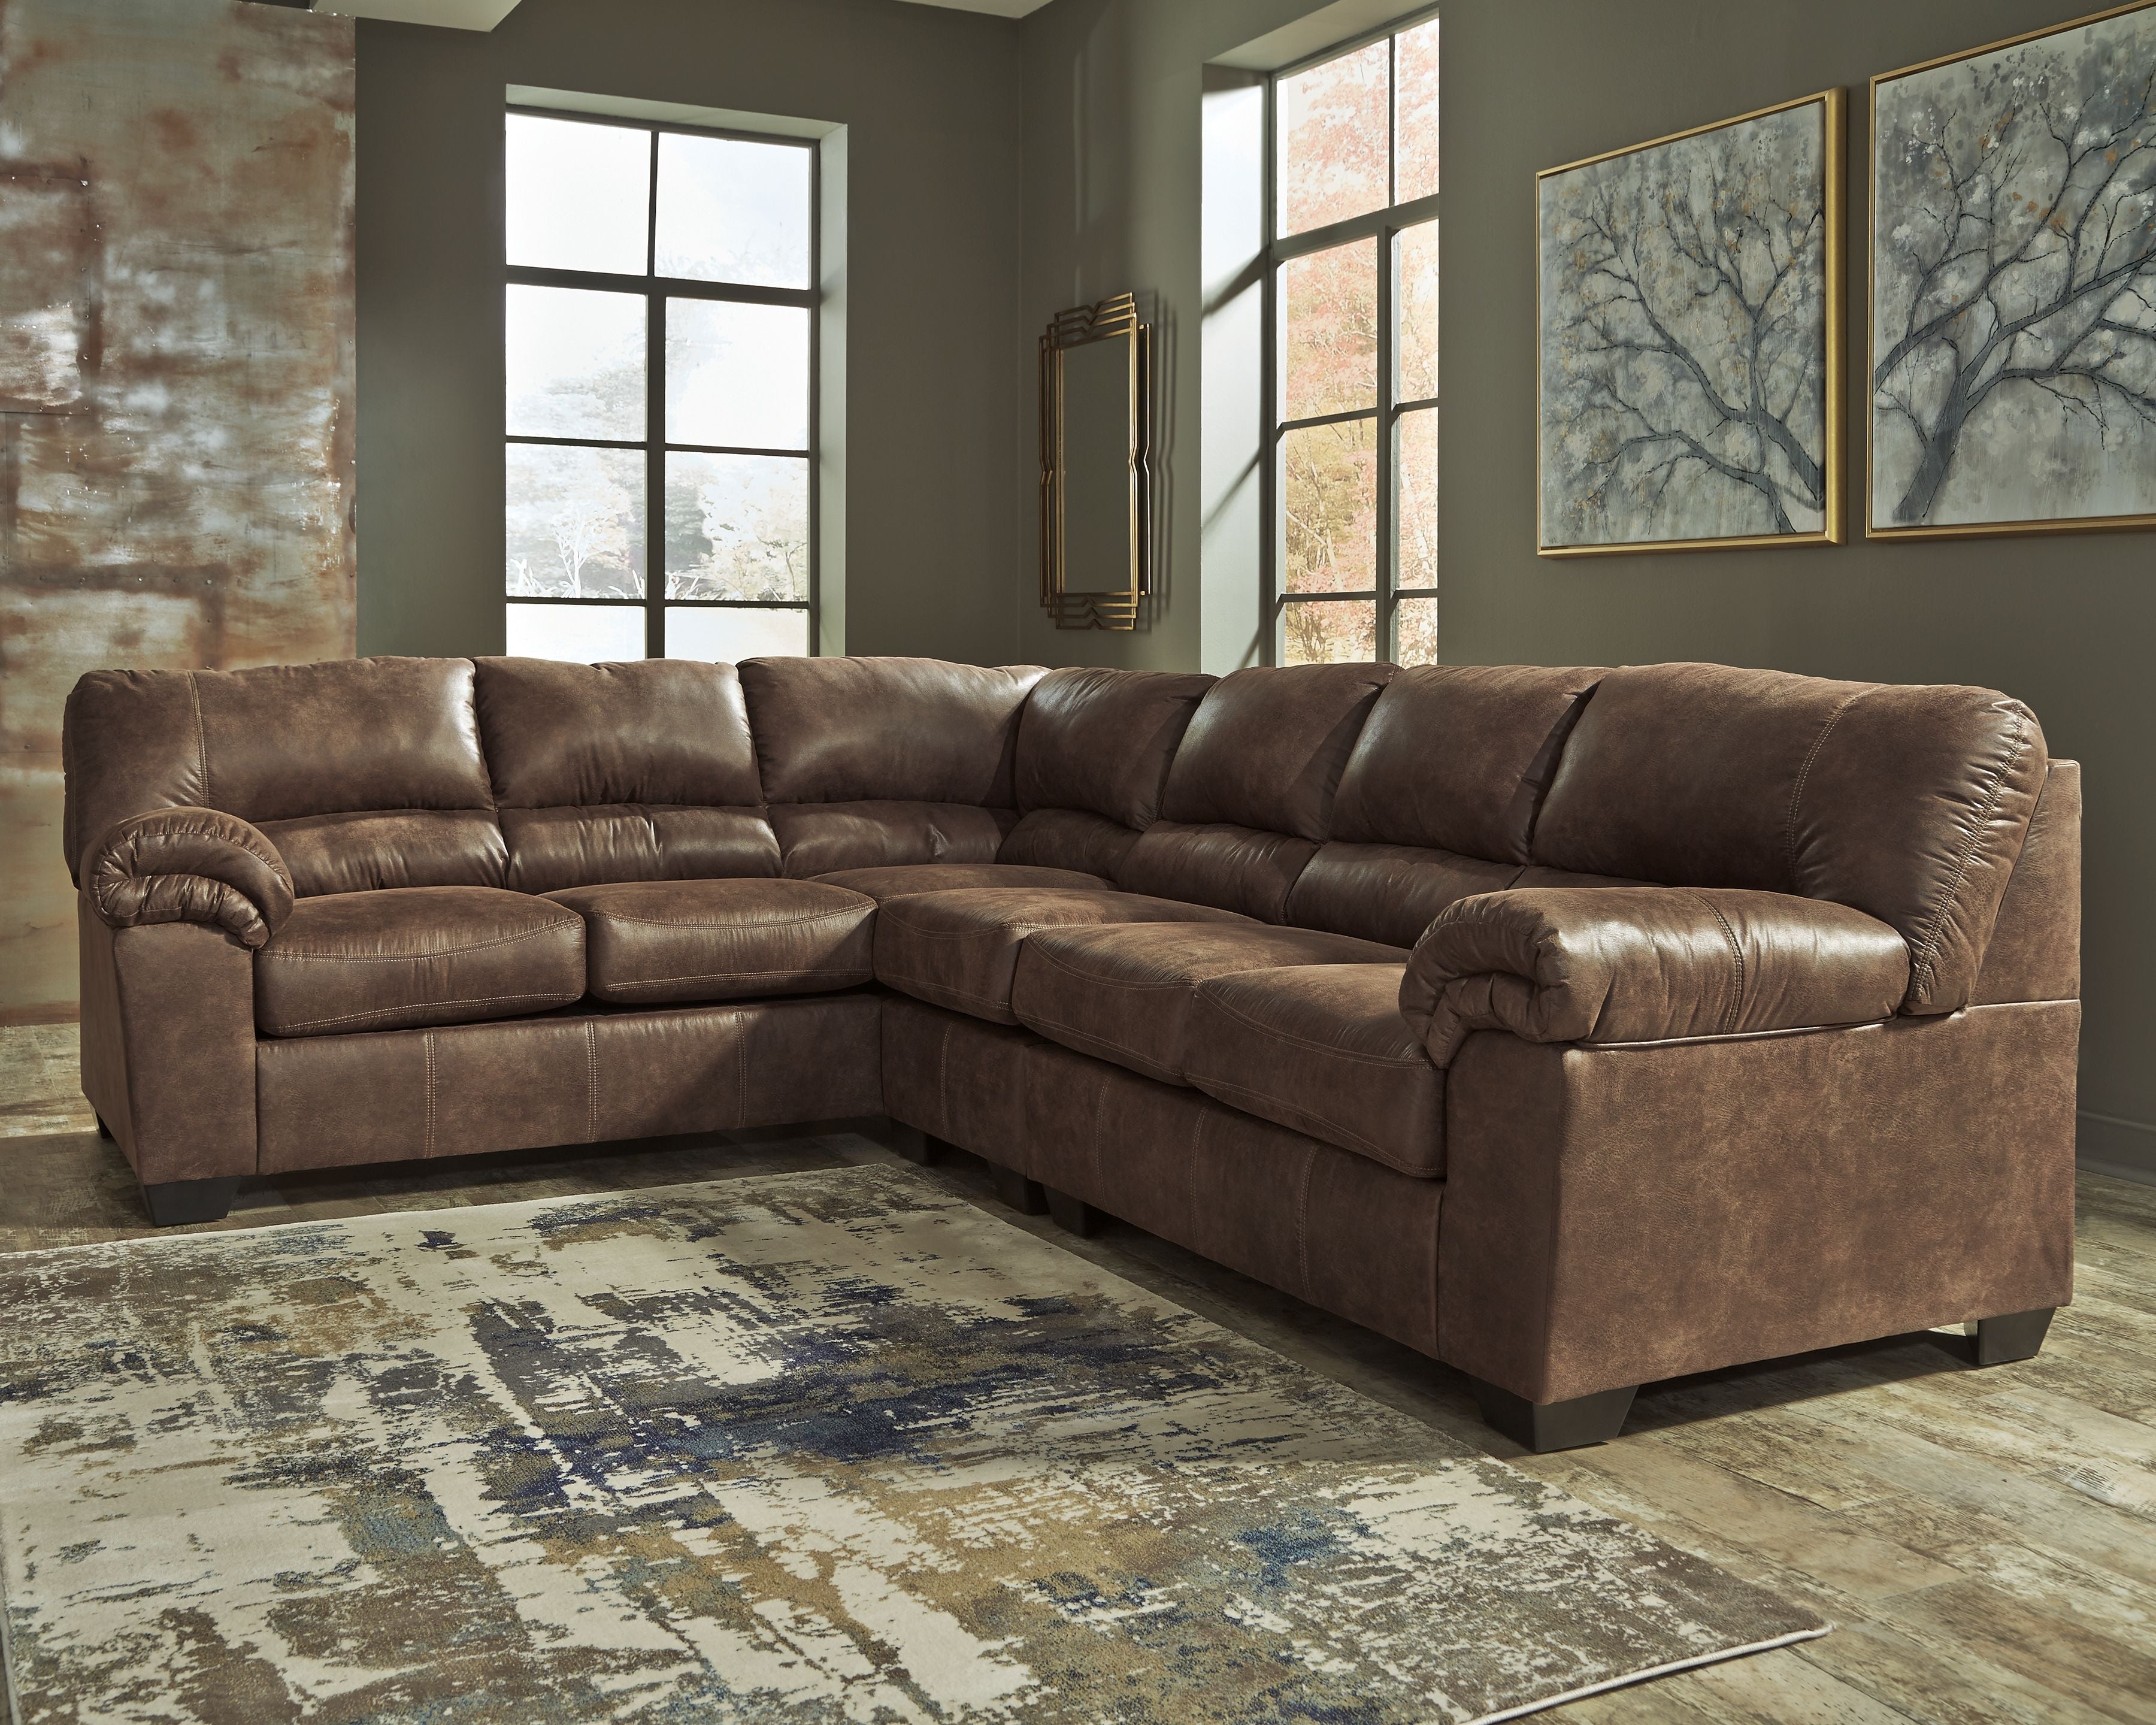 Bladen - Loveseat Sectional-Stationary Sectionals-American Furniture Outlet